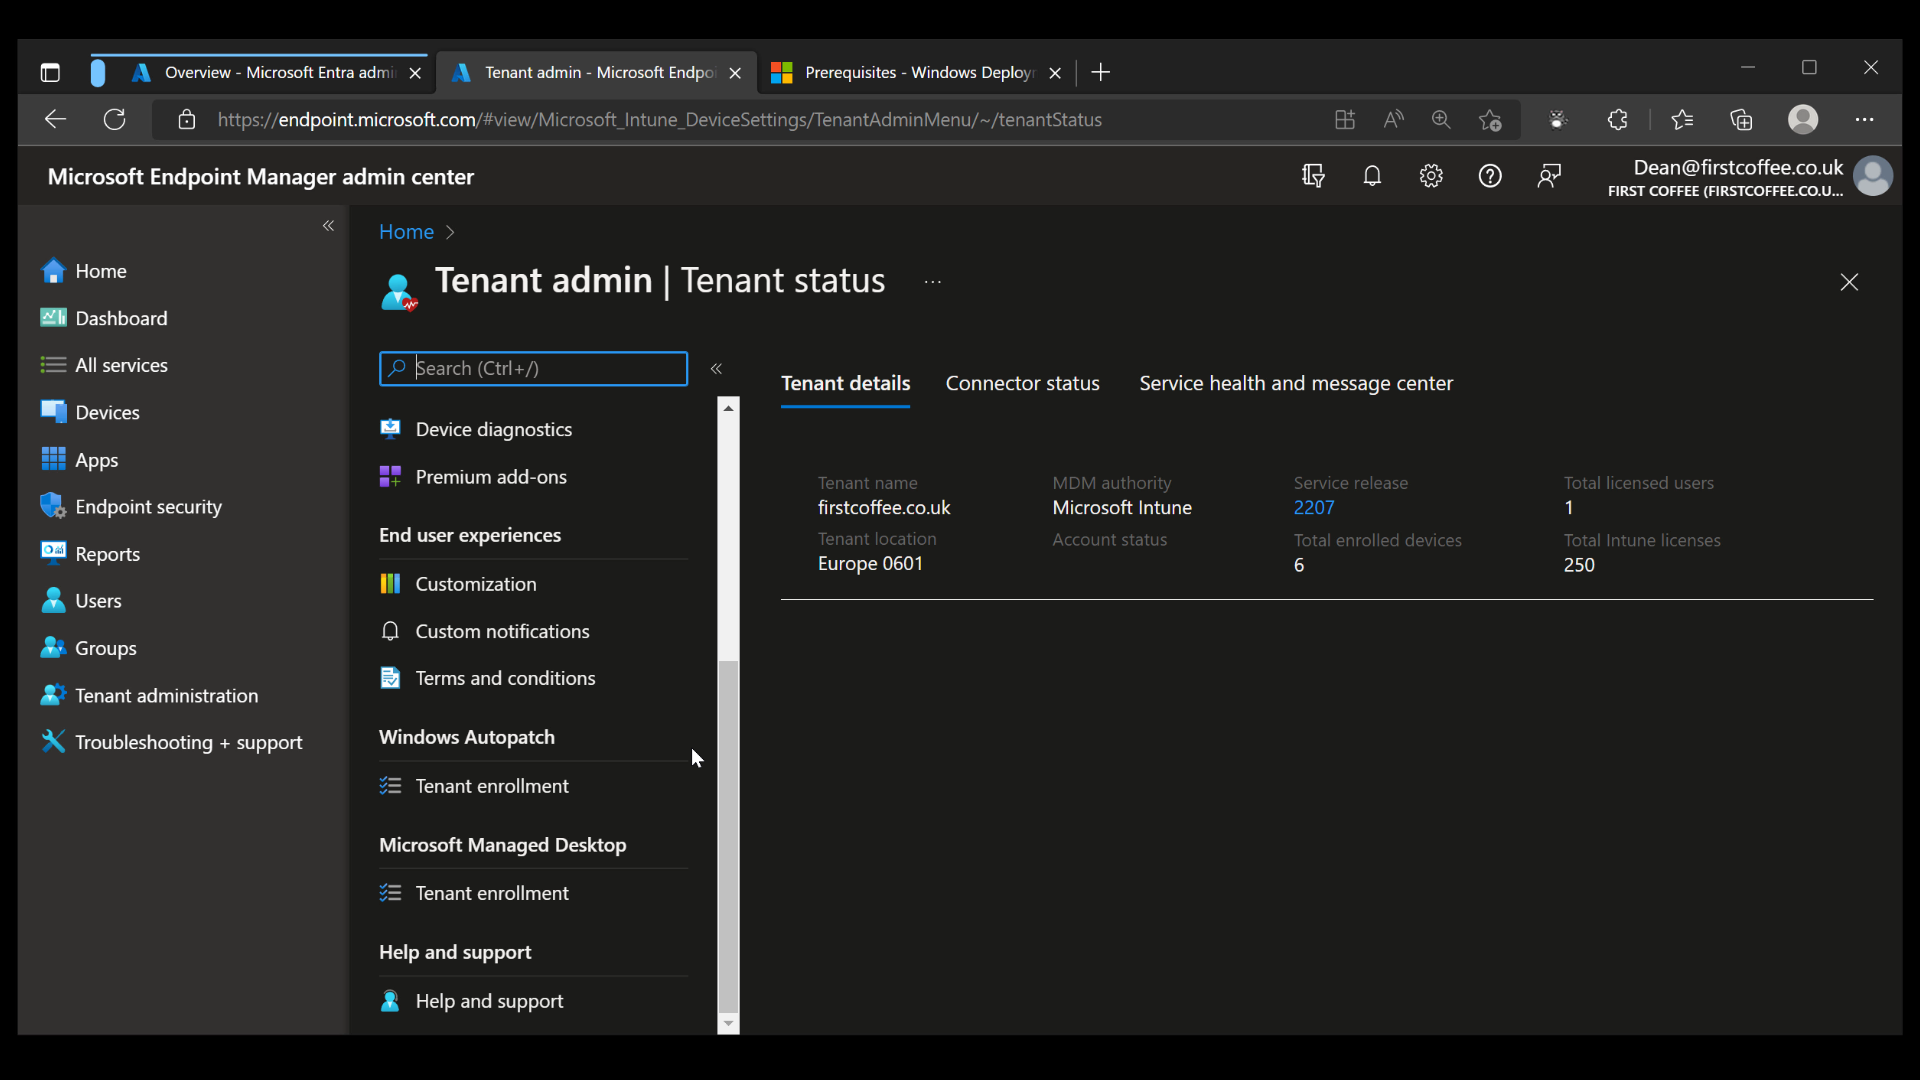 Windows Autopatch tenant enrollment in the Endpoint Manager admin center